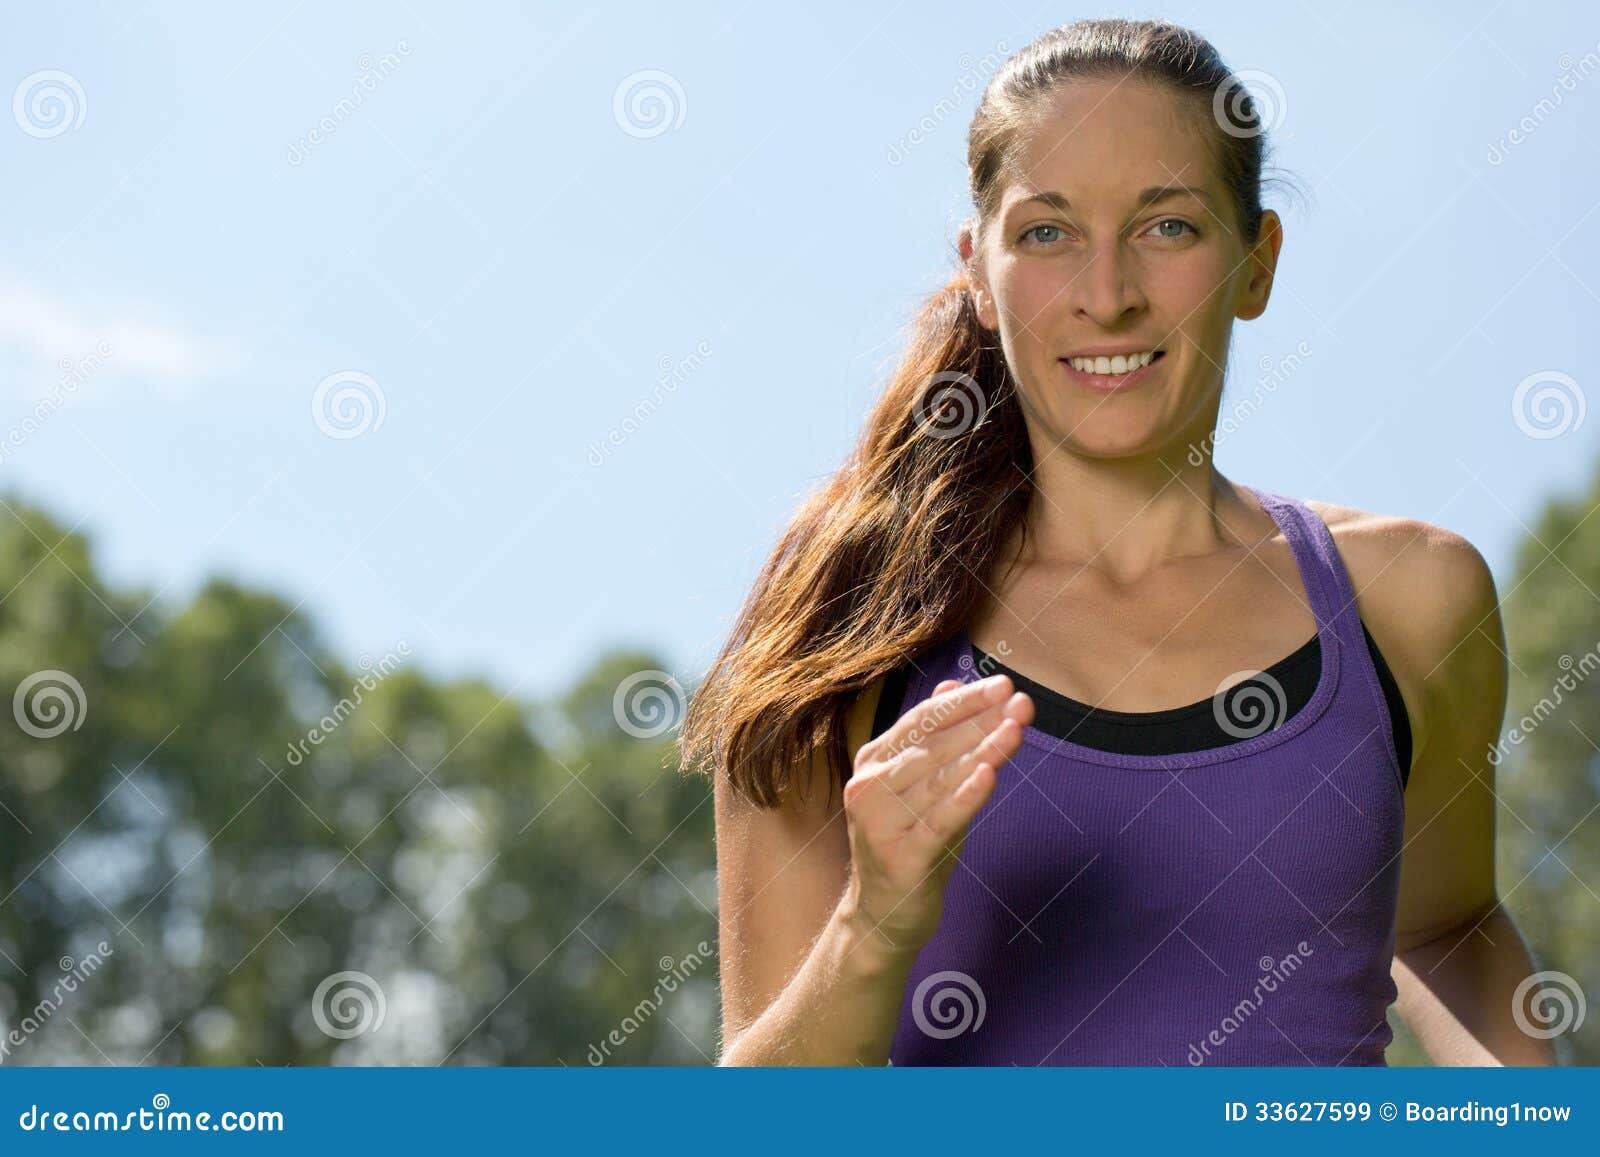 Young Woman Running Outdoors Training for Marathon Run Stock Image ...